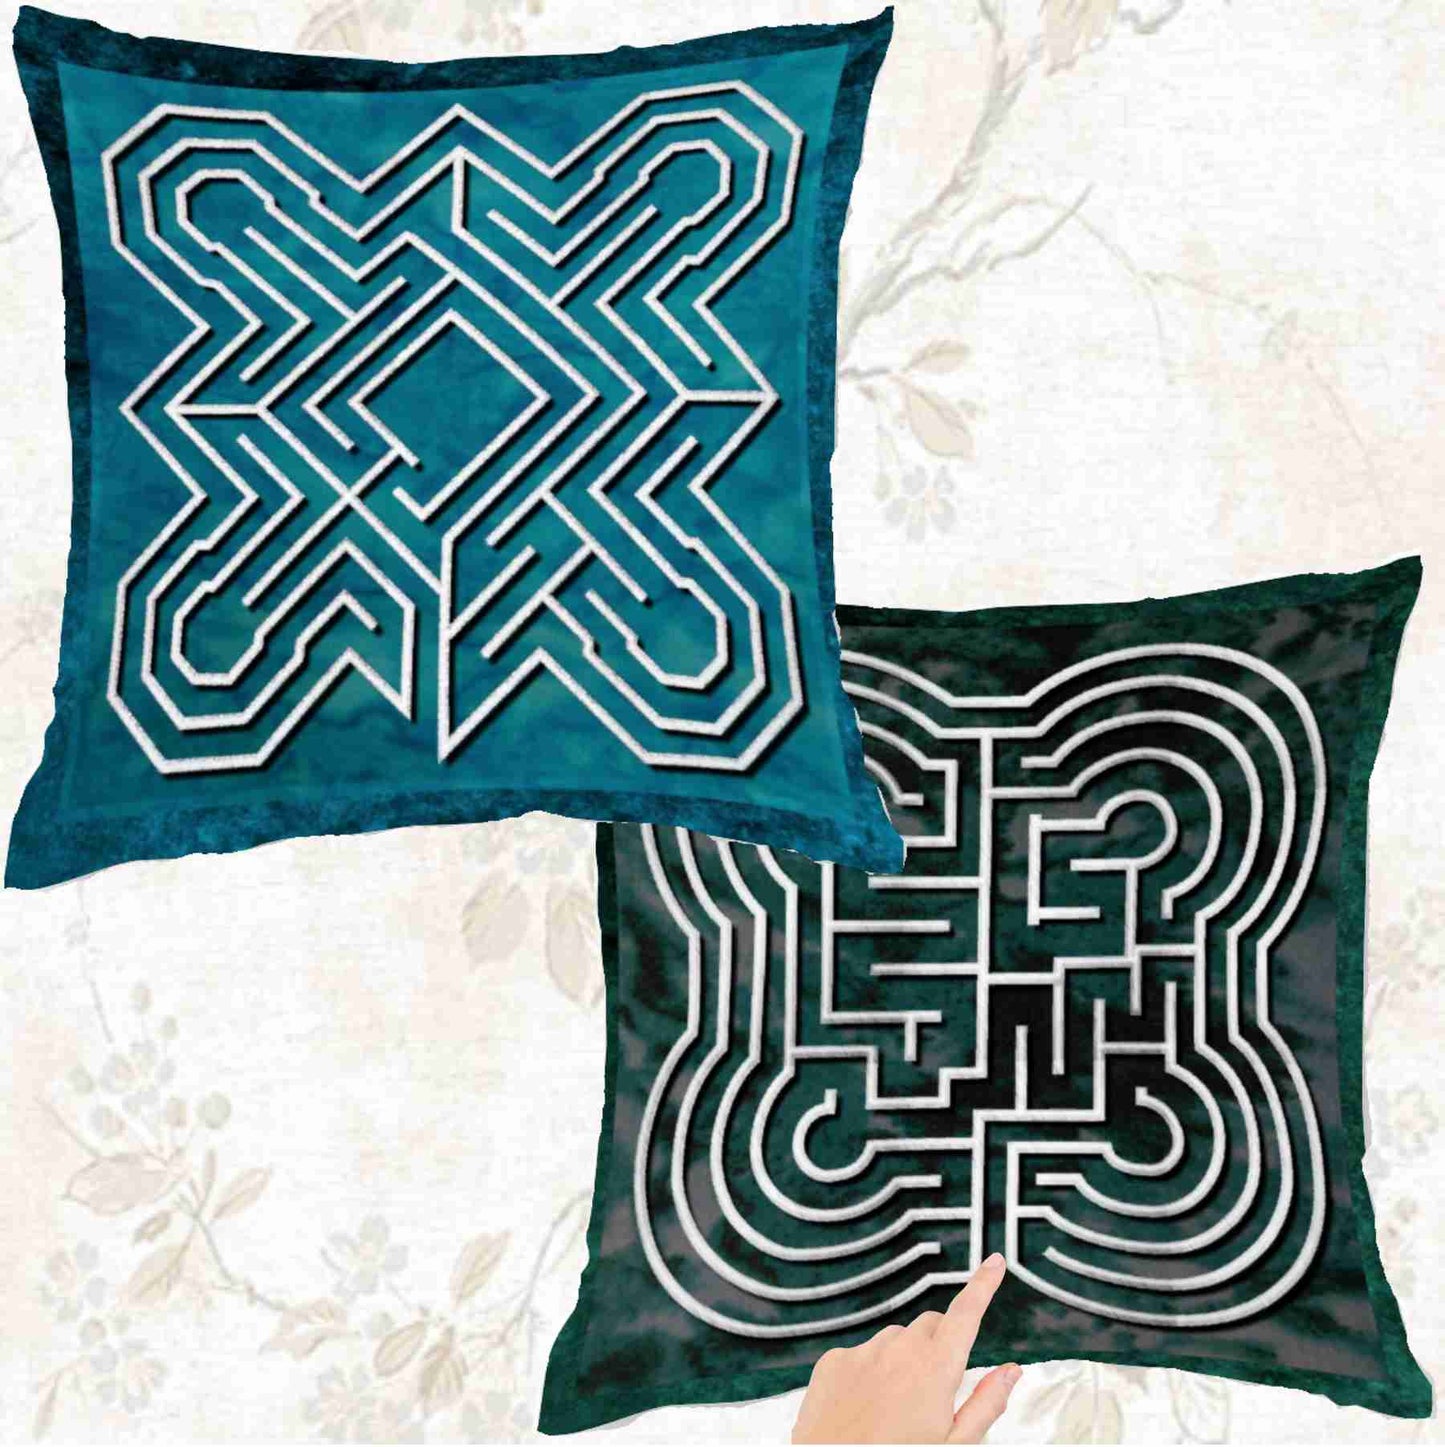 Double Labyrinth Pillow Sham - Ely-Commelyn